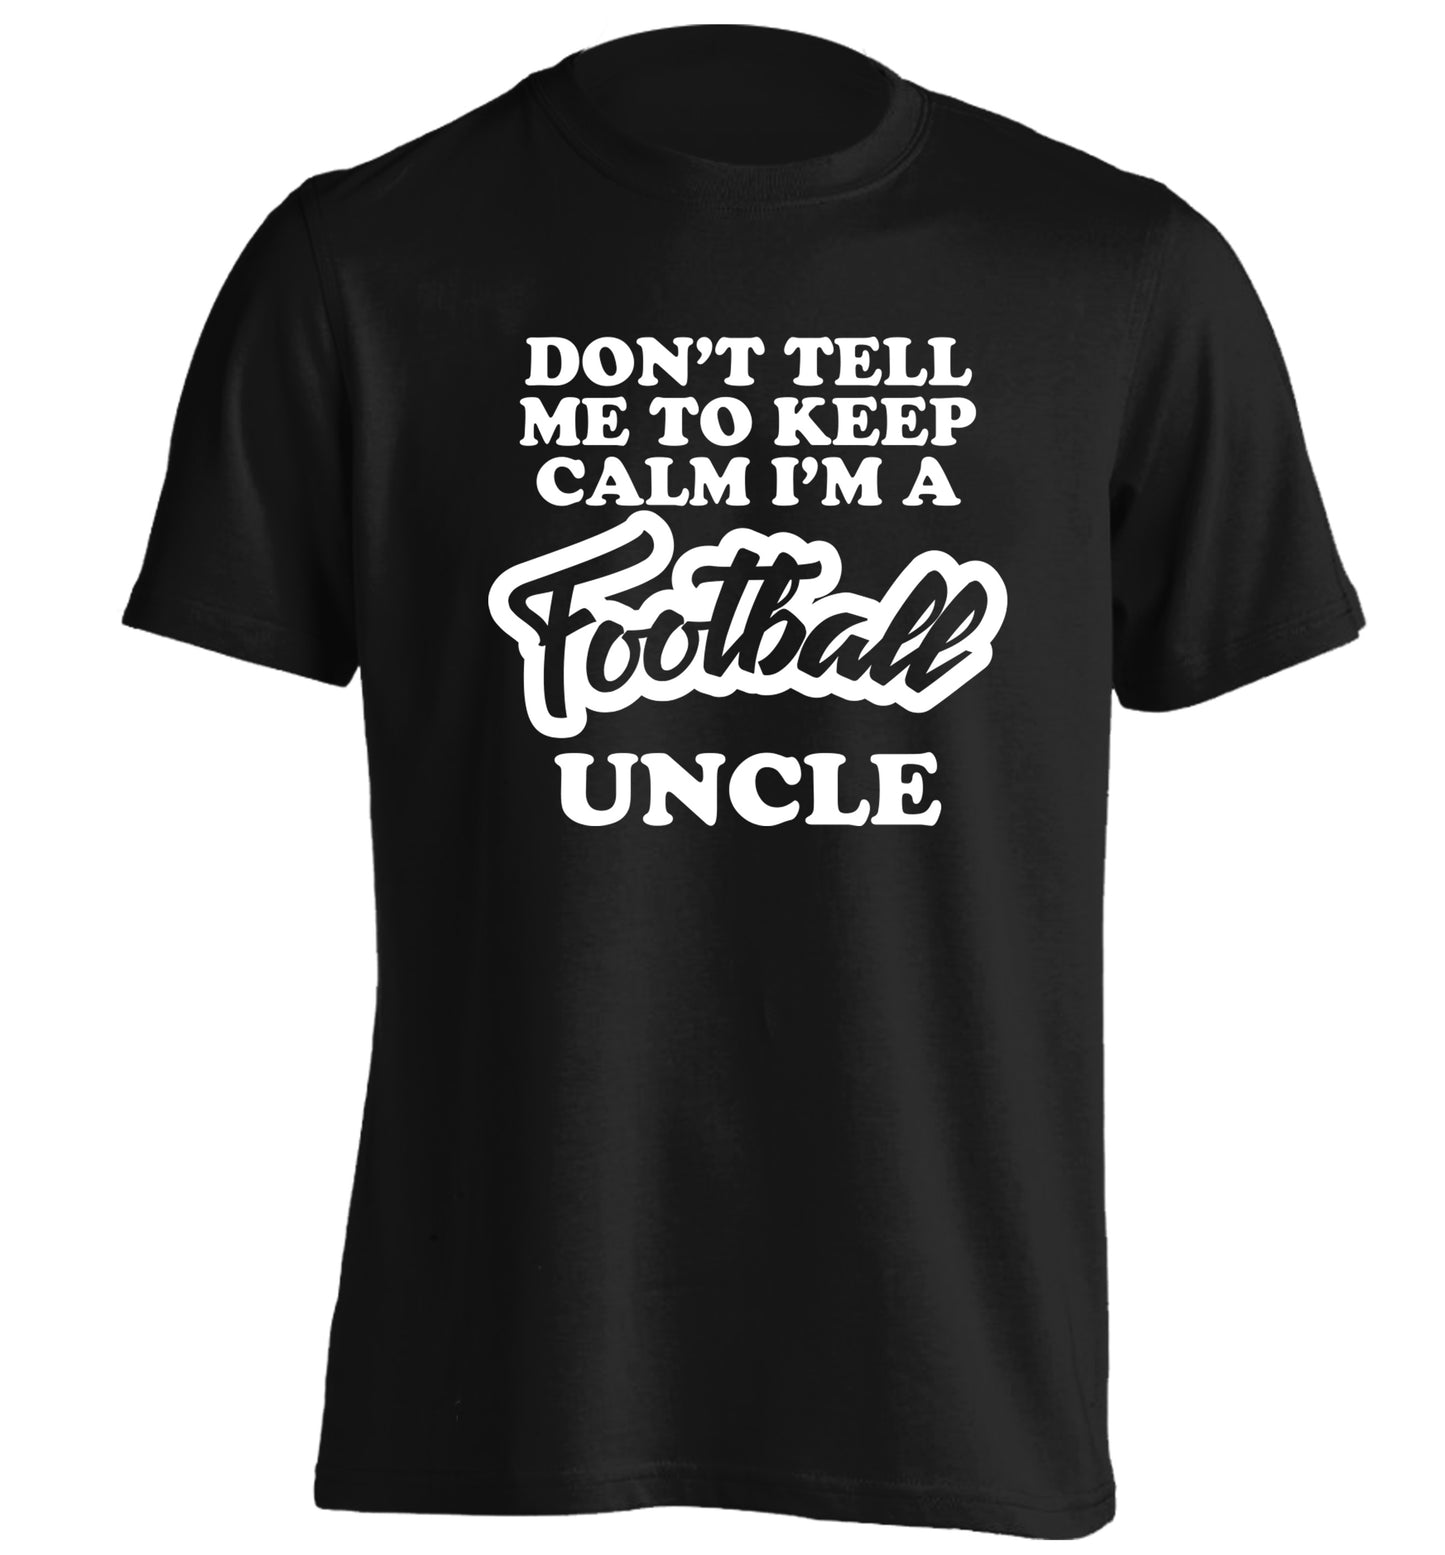 Don't tell me to keep calm I'm a football uncle adults unisexblack Tshirt 2XL